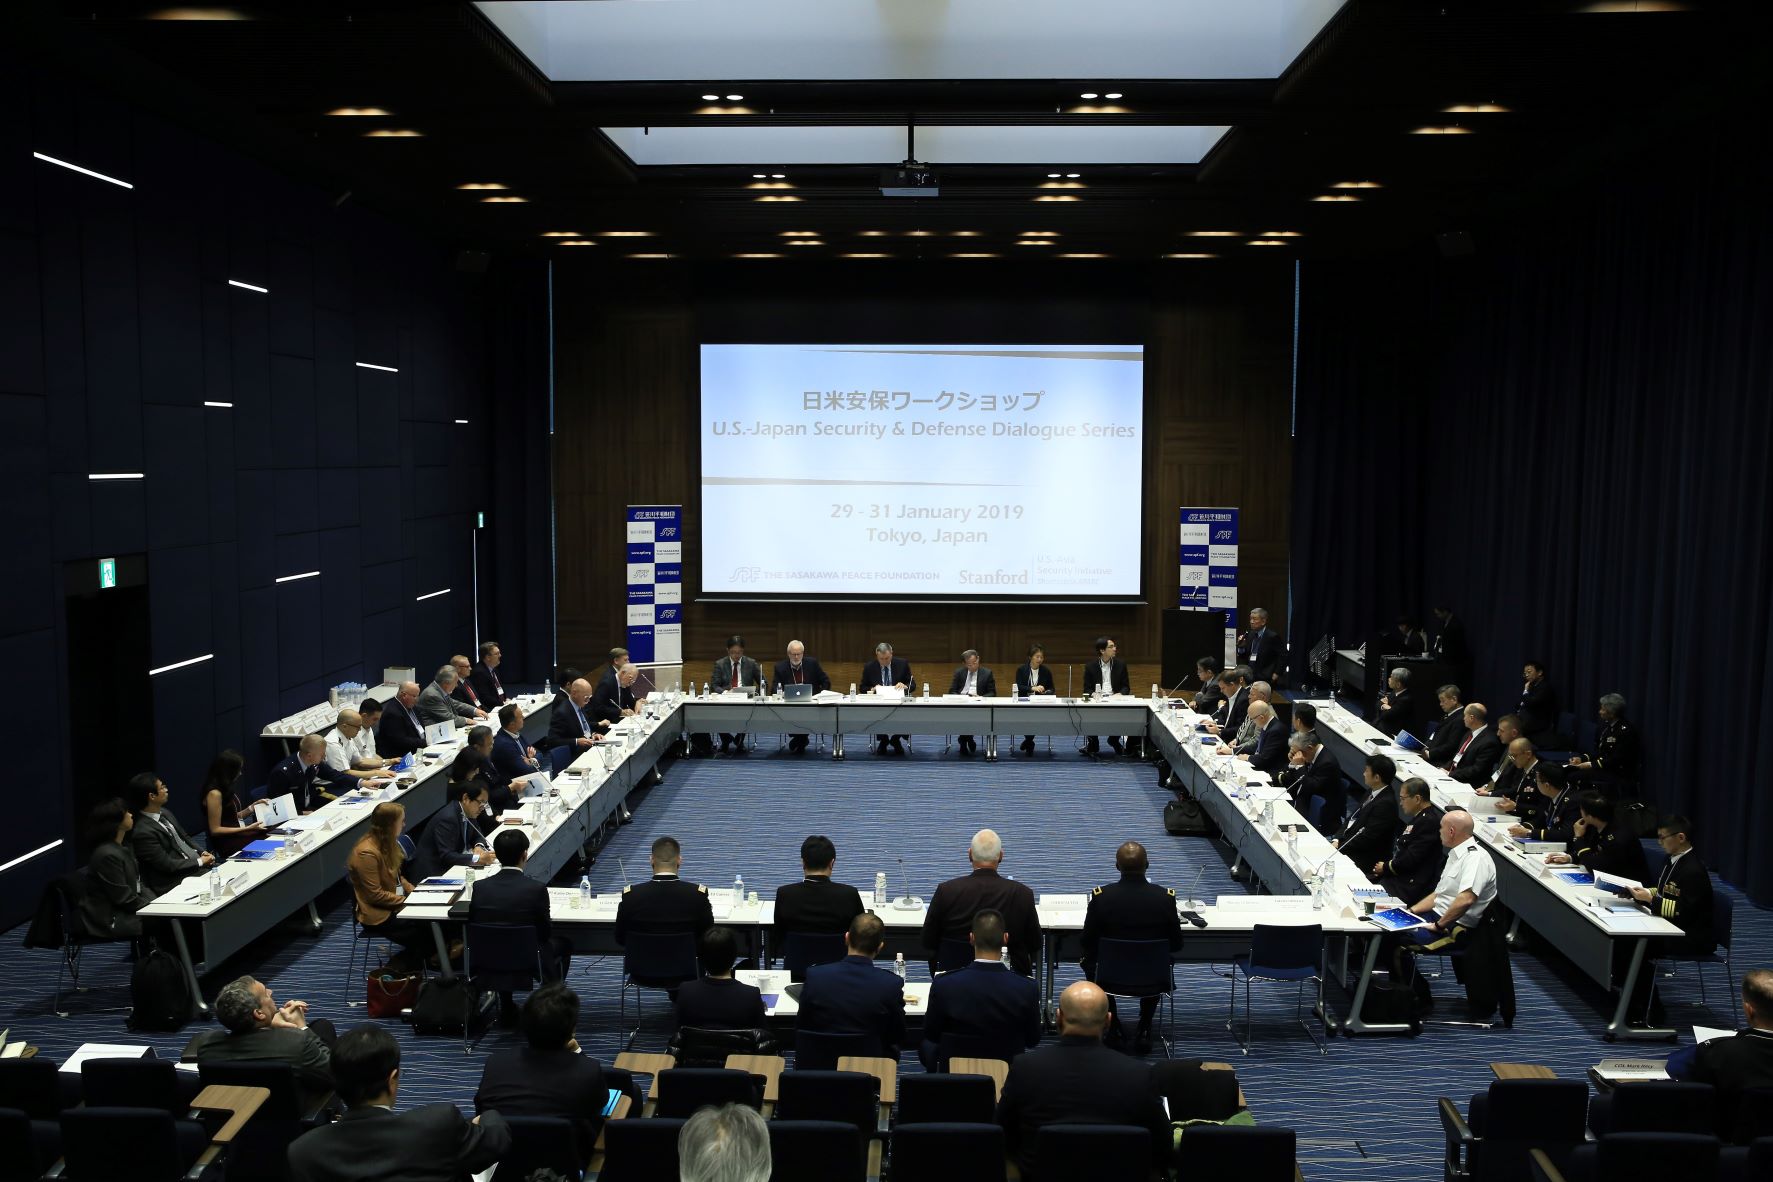 A panel of security specialists met at SPF in Tokyo for candid discussions about the Japan-U.S. security alliance